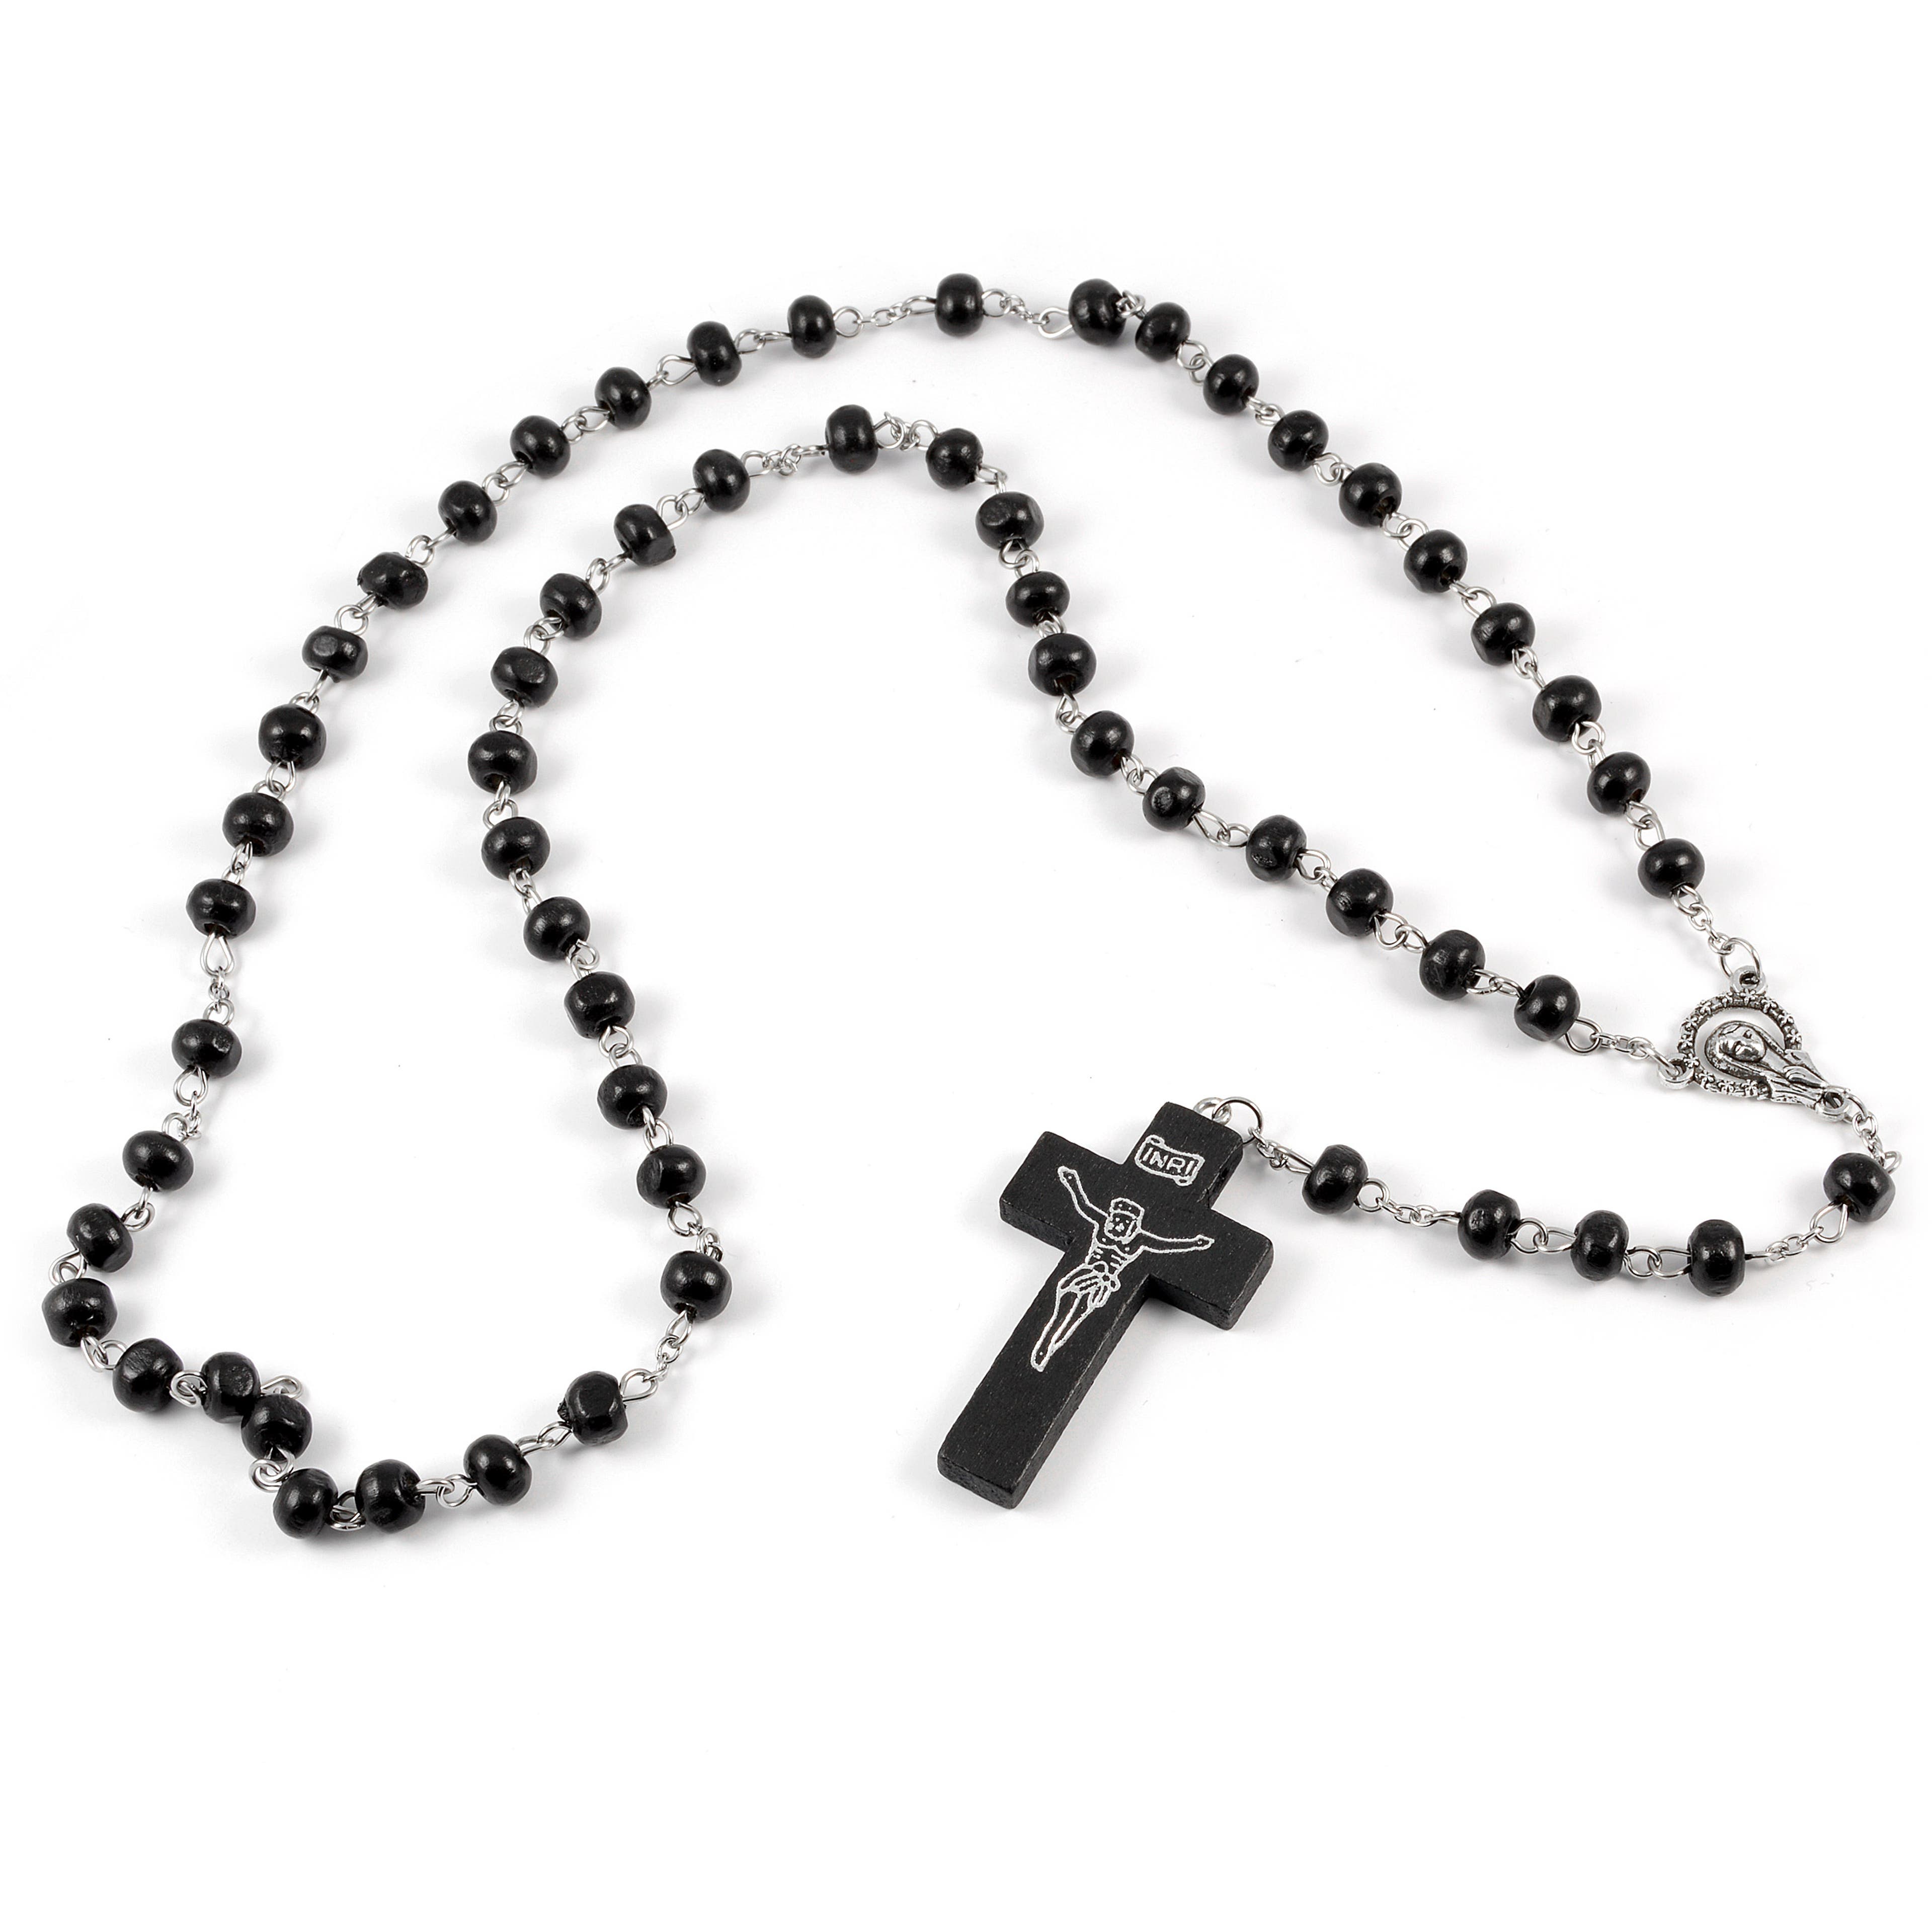 Black Wooden Cross Rosary Necklace